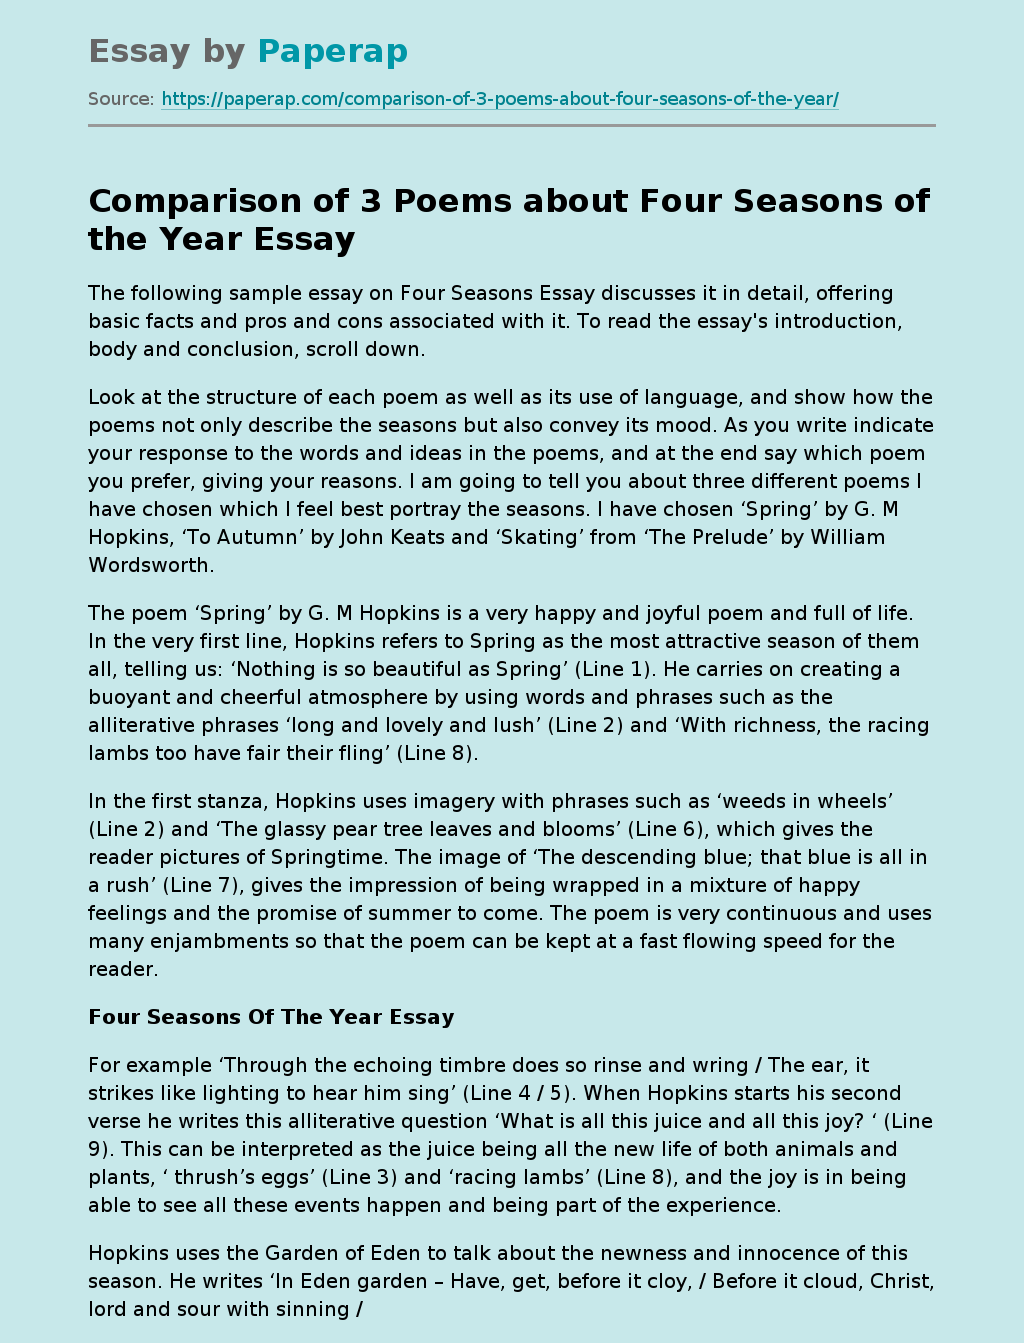 Comparison of 3 Poems about Four Seasons of the Year